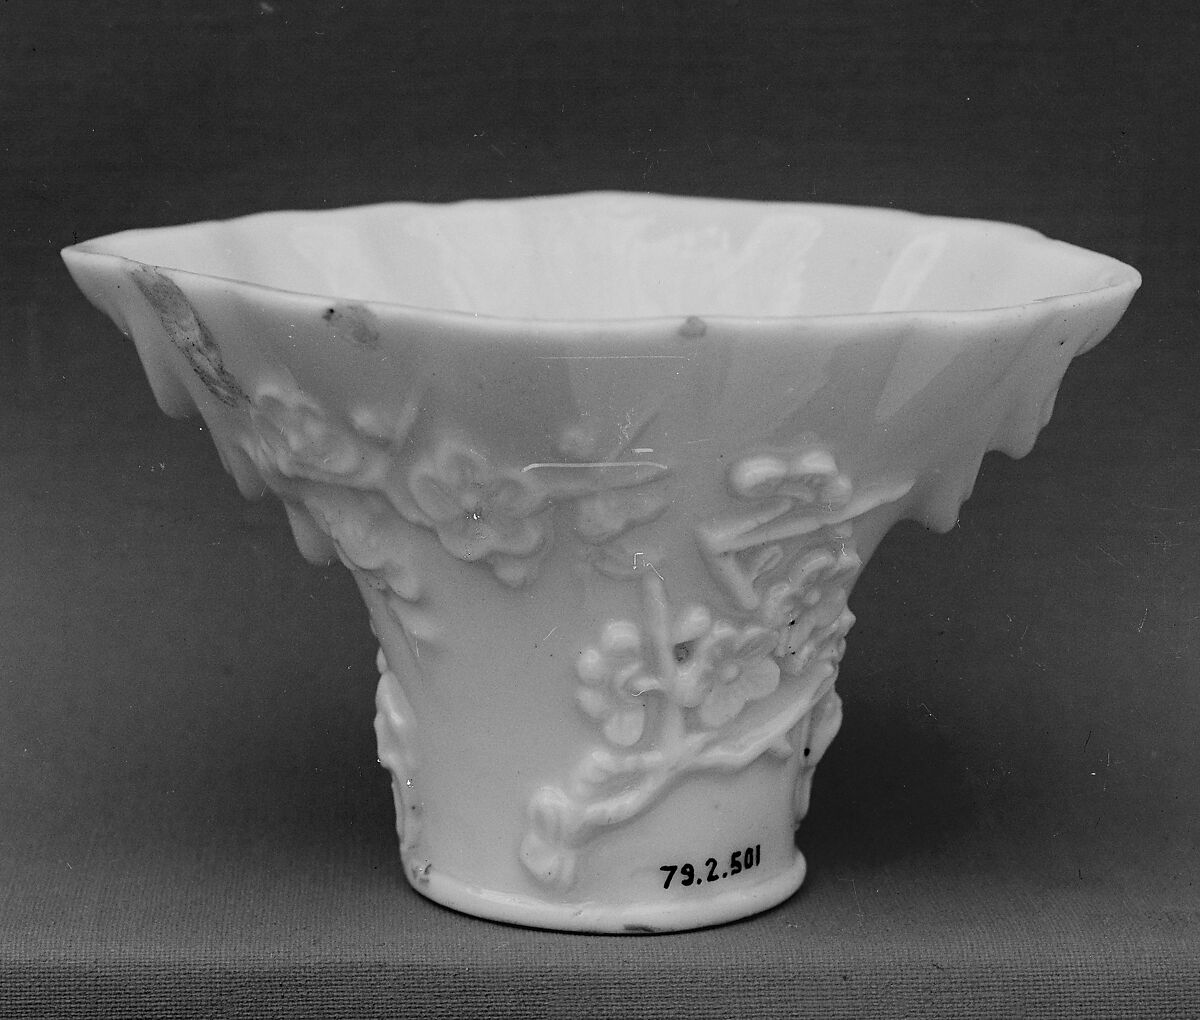 Cup, Porcelain with low-relief decoration under a clear glaze, Dehua ware (blanc de chine), China 